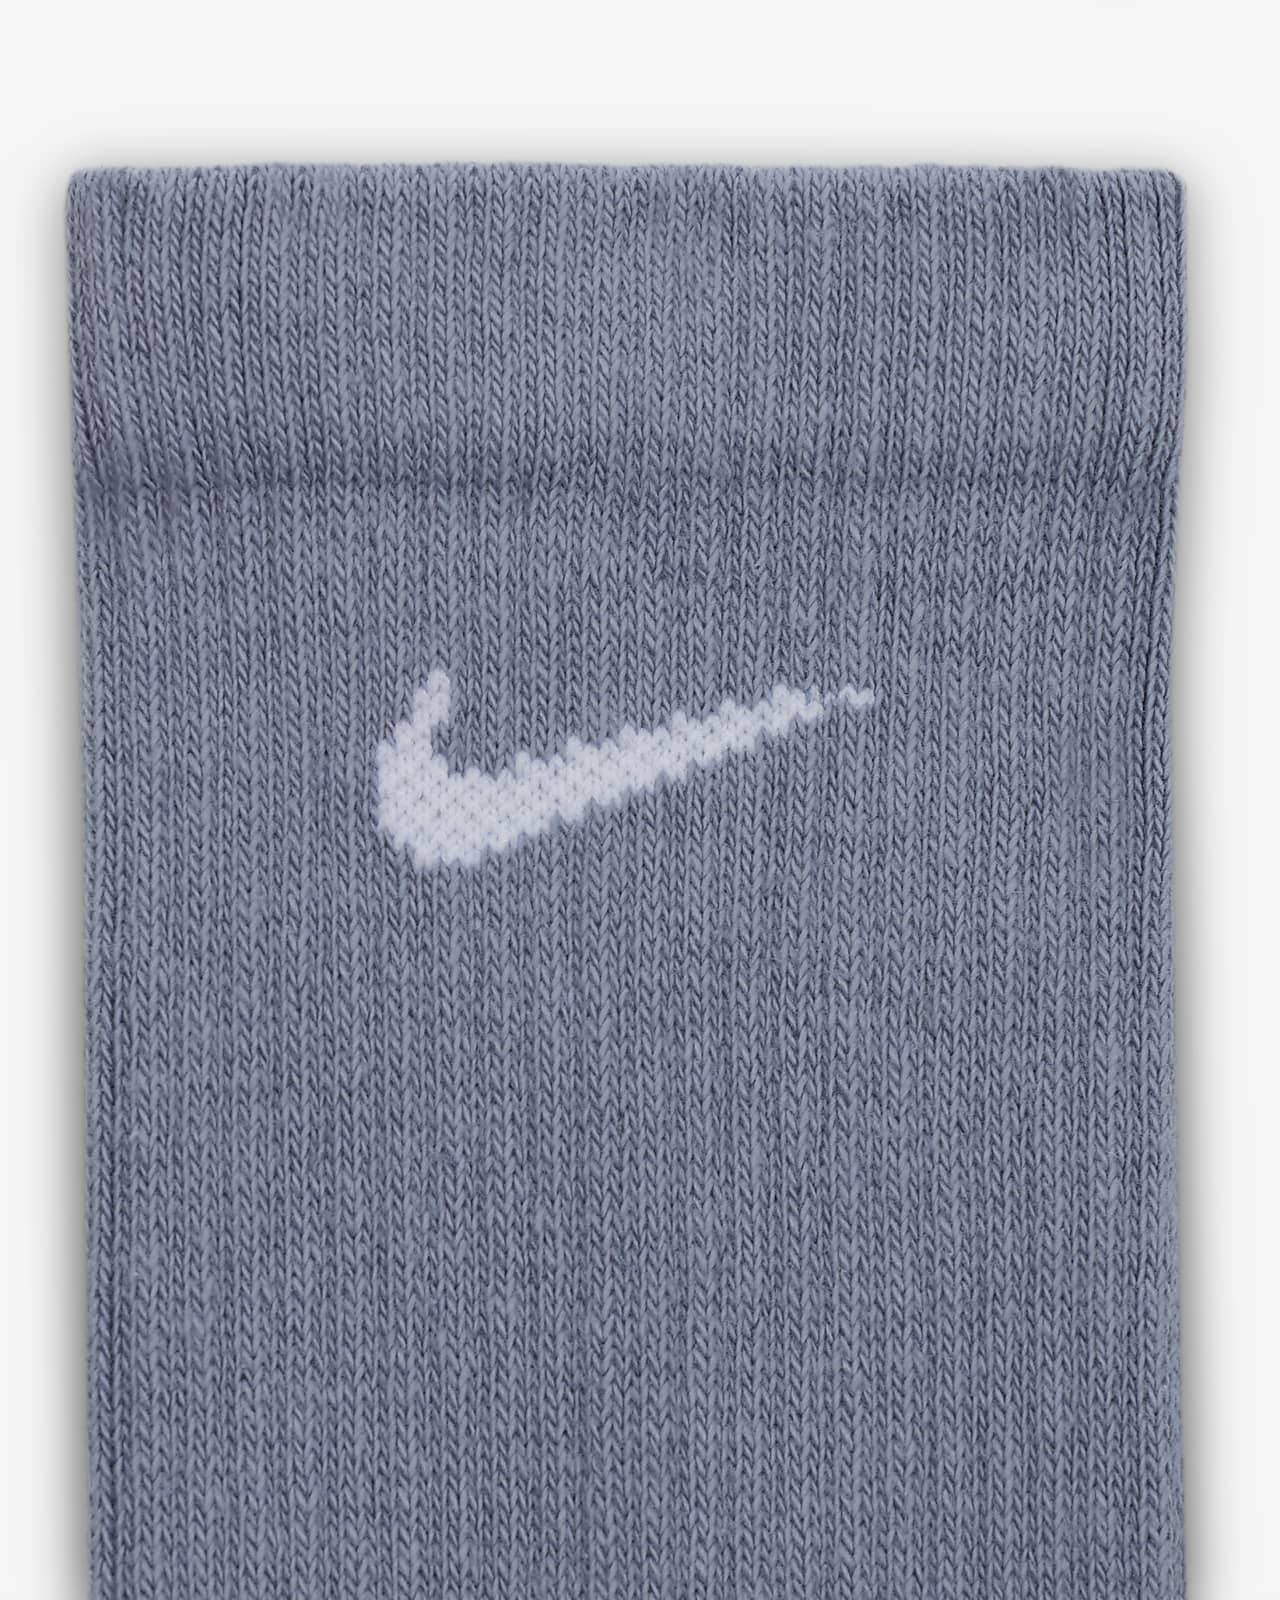 Extra 25% Off for Members: 100s of Styles Added Plus Size Underwear. Nike .com